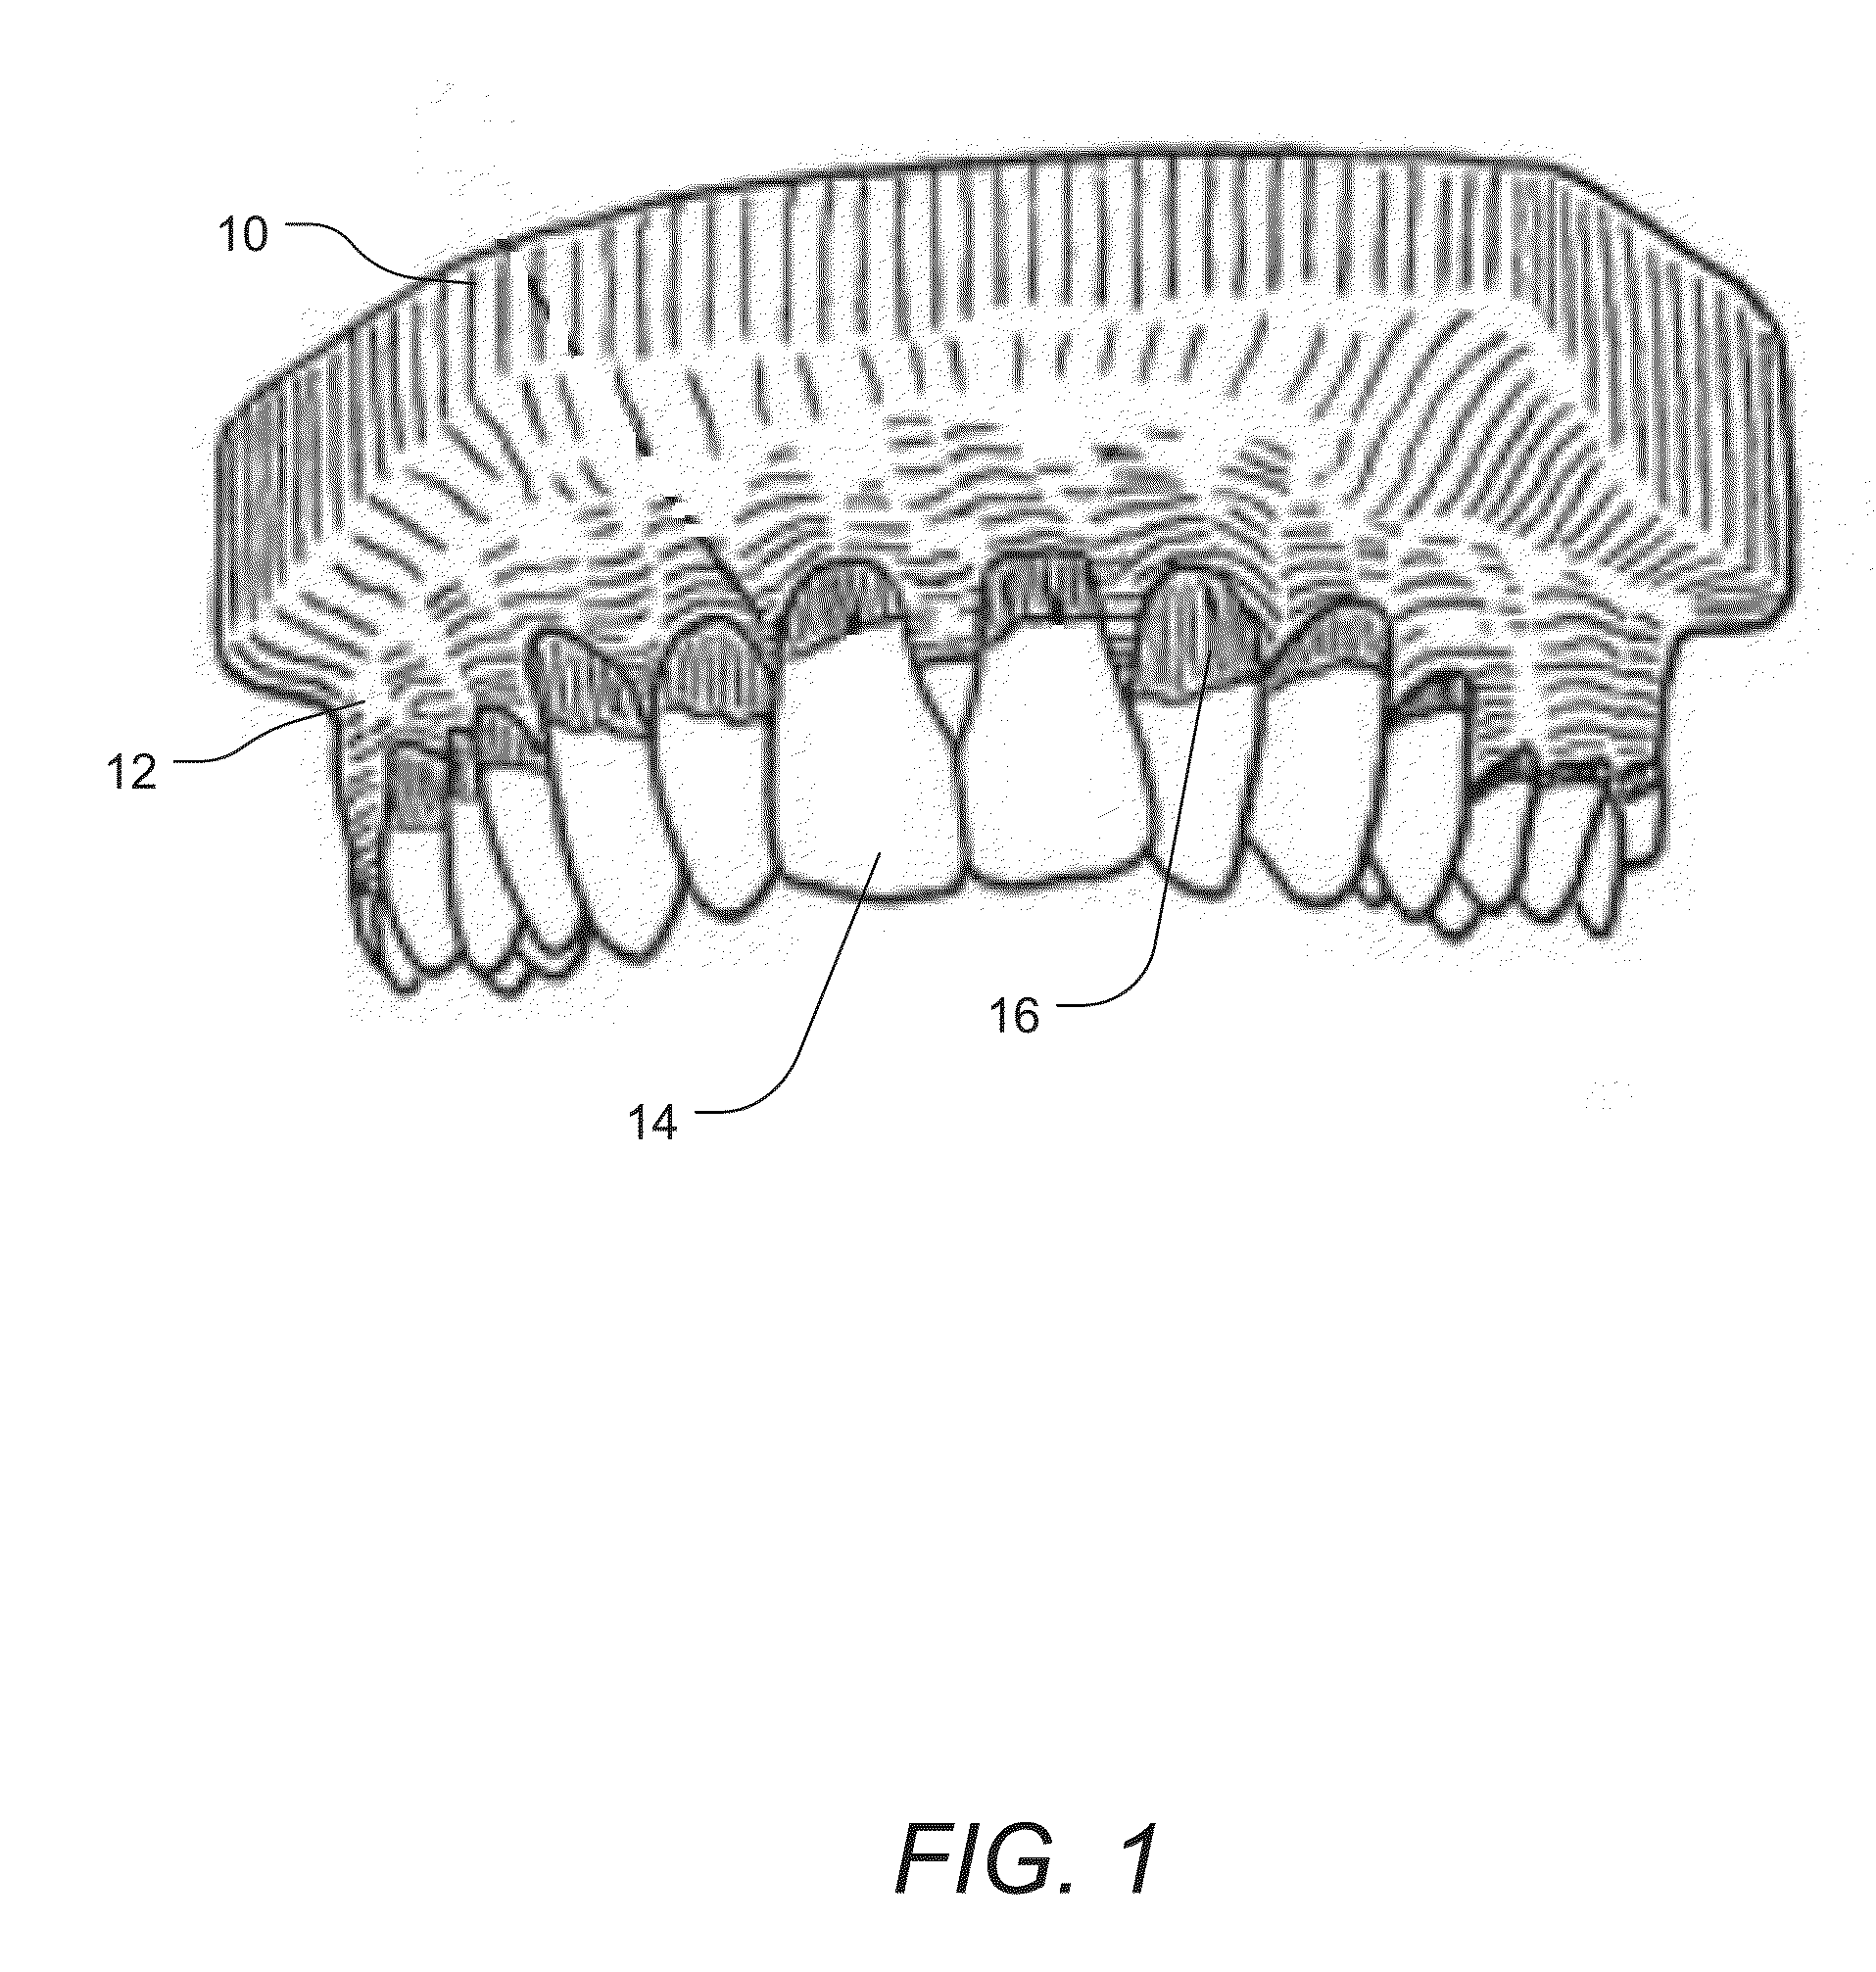 Non-surgical systems and methods for treating receding gums